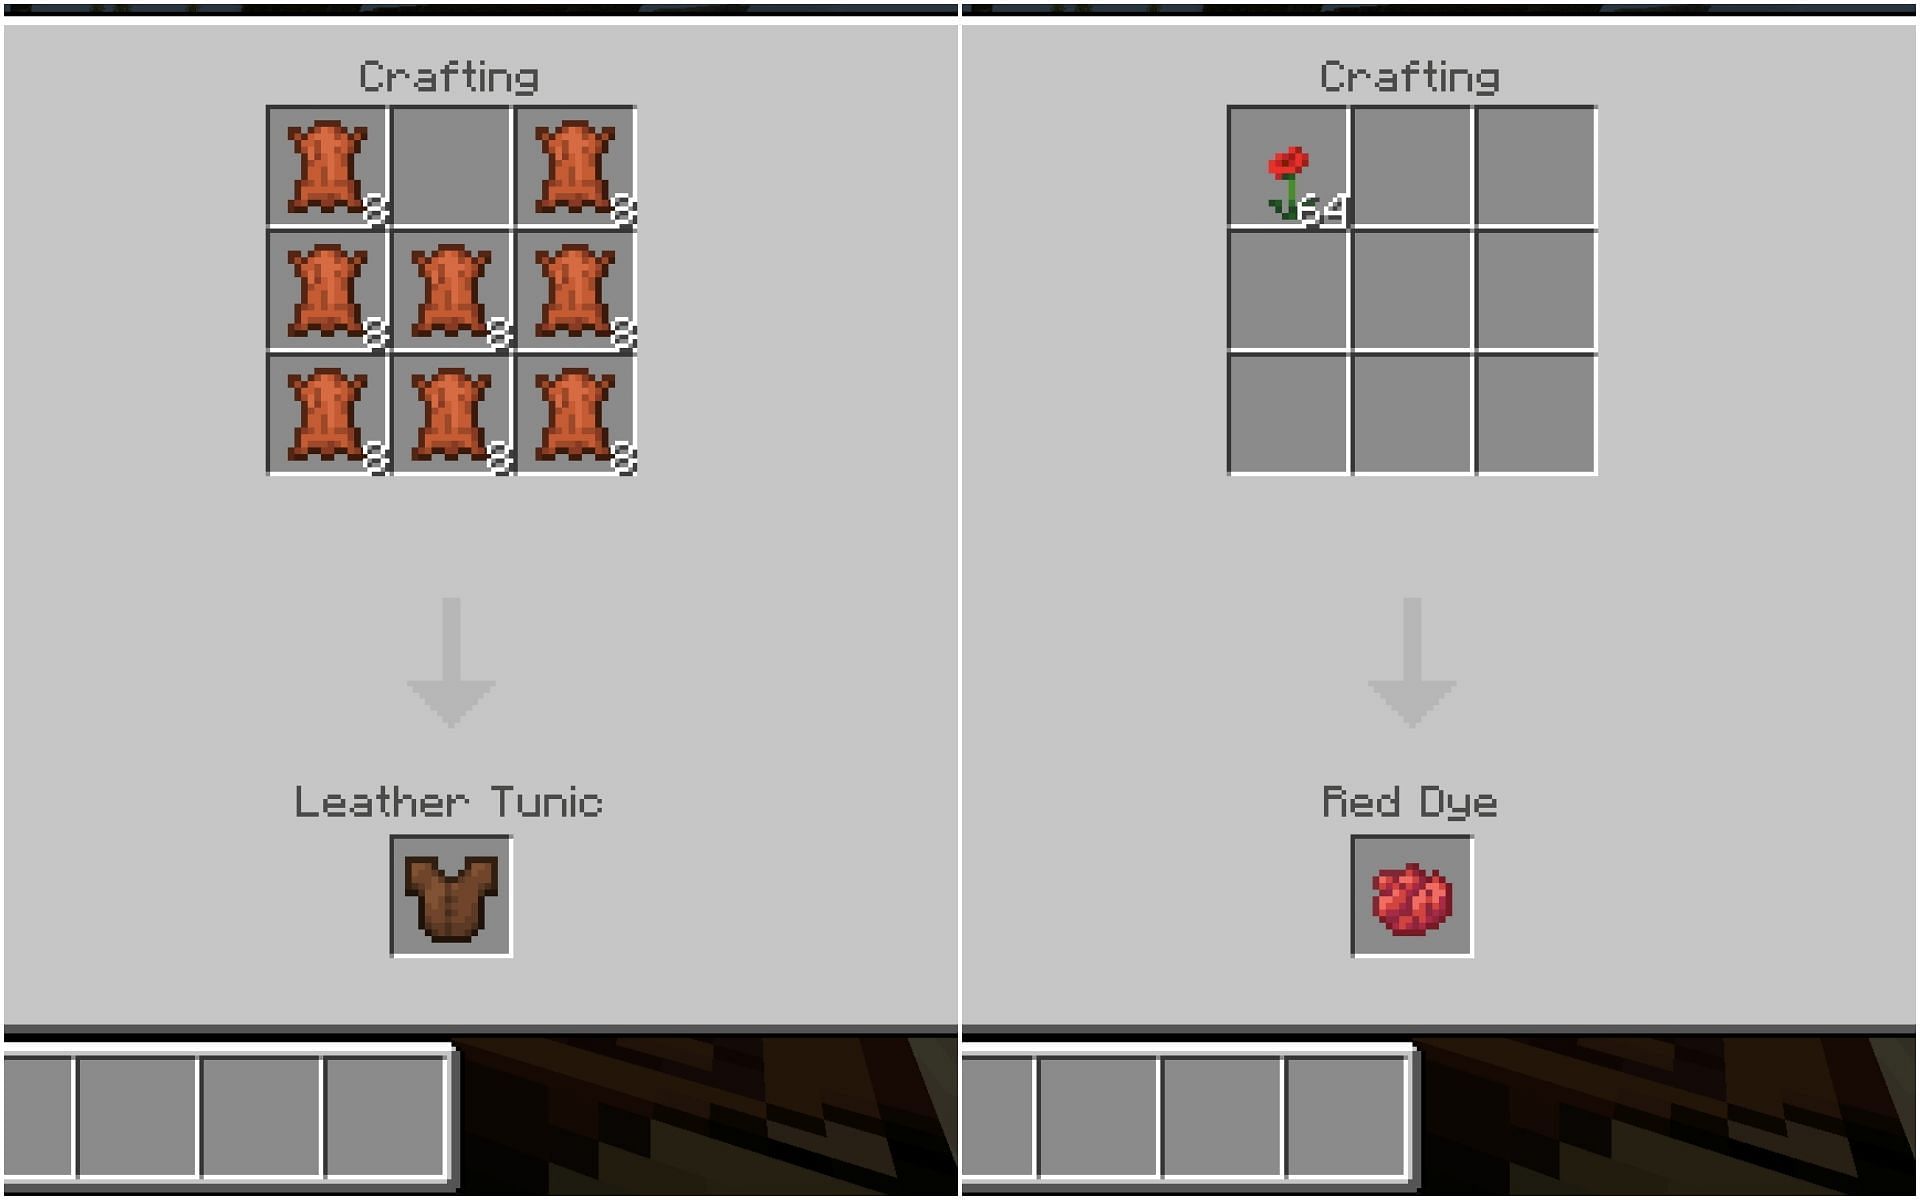 Crafting recipes for leather armor parts and dyes (Image via Minecraft Pocket 1.19 update)